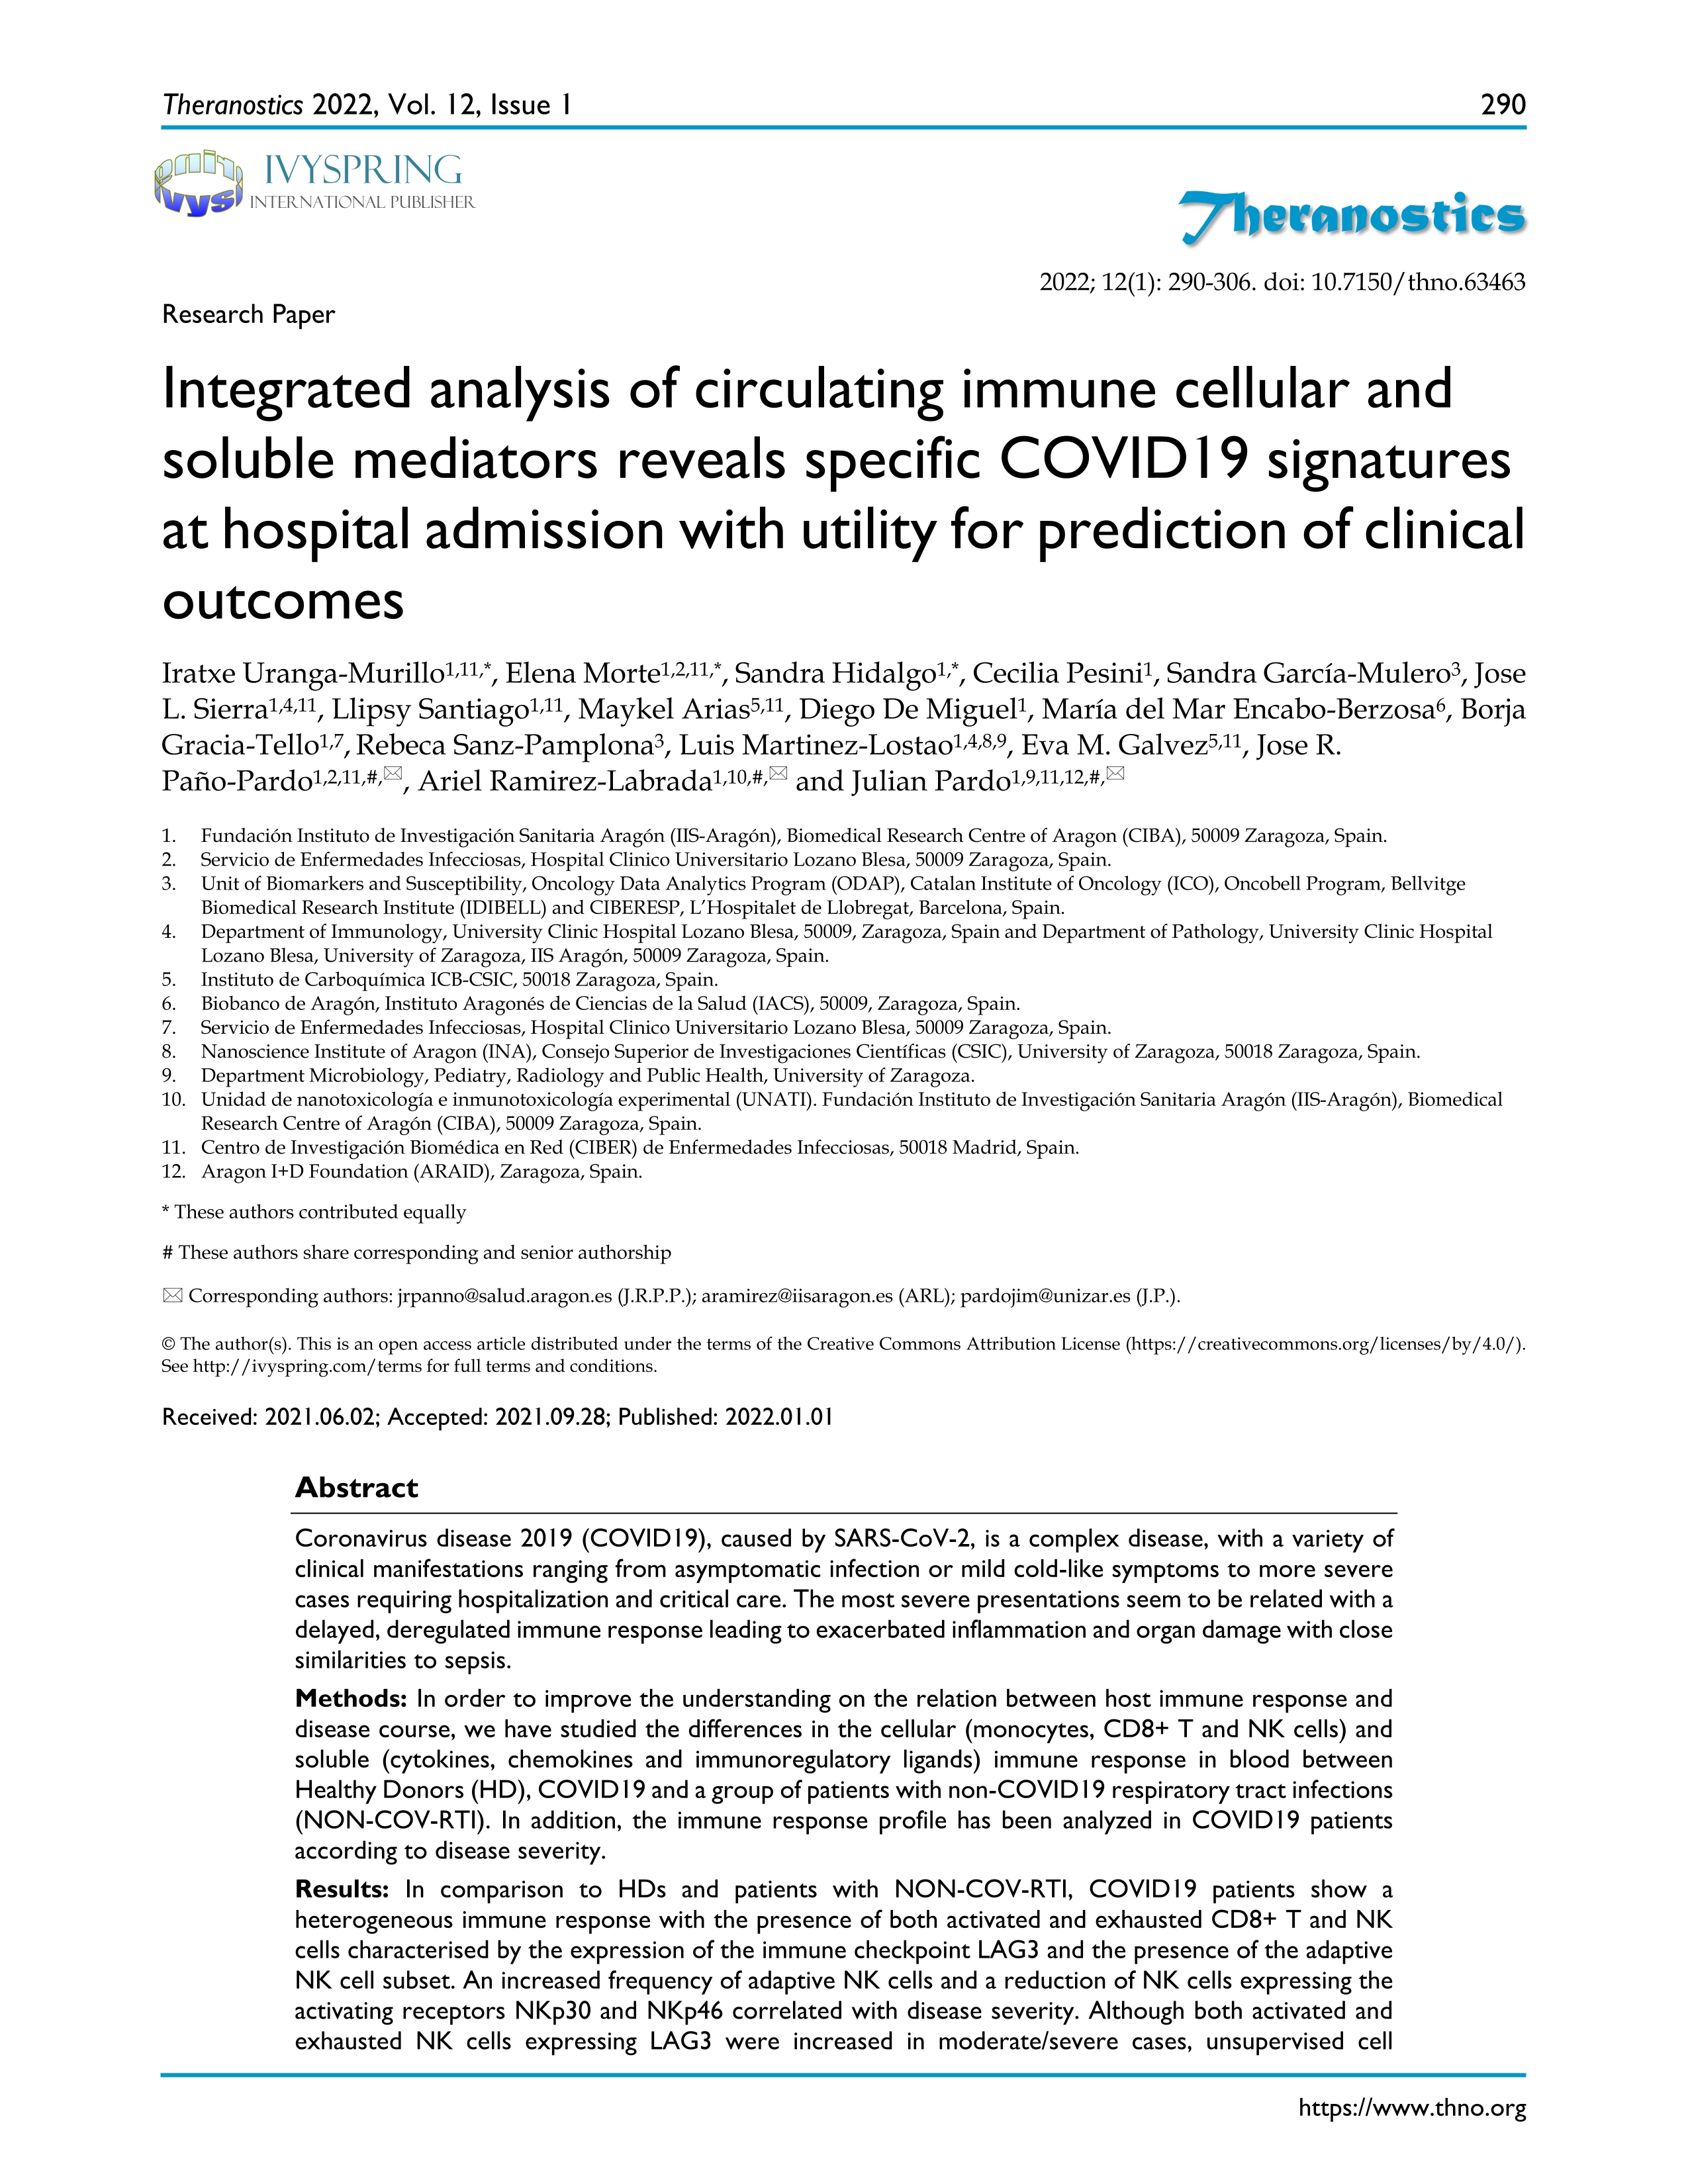 Integrated analysis of circulating immune cellular and soluble mediators reveals specific COVID19 signatures at hospital admission with utility for prediction of clinical outcomes